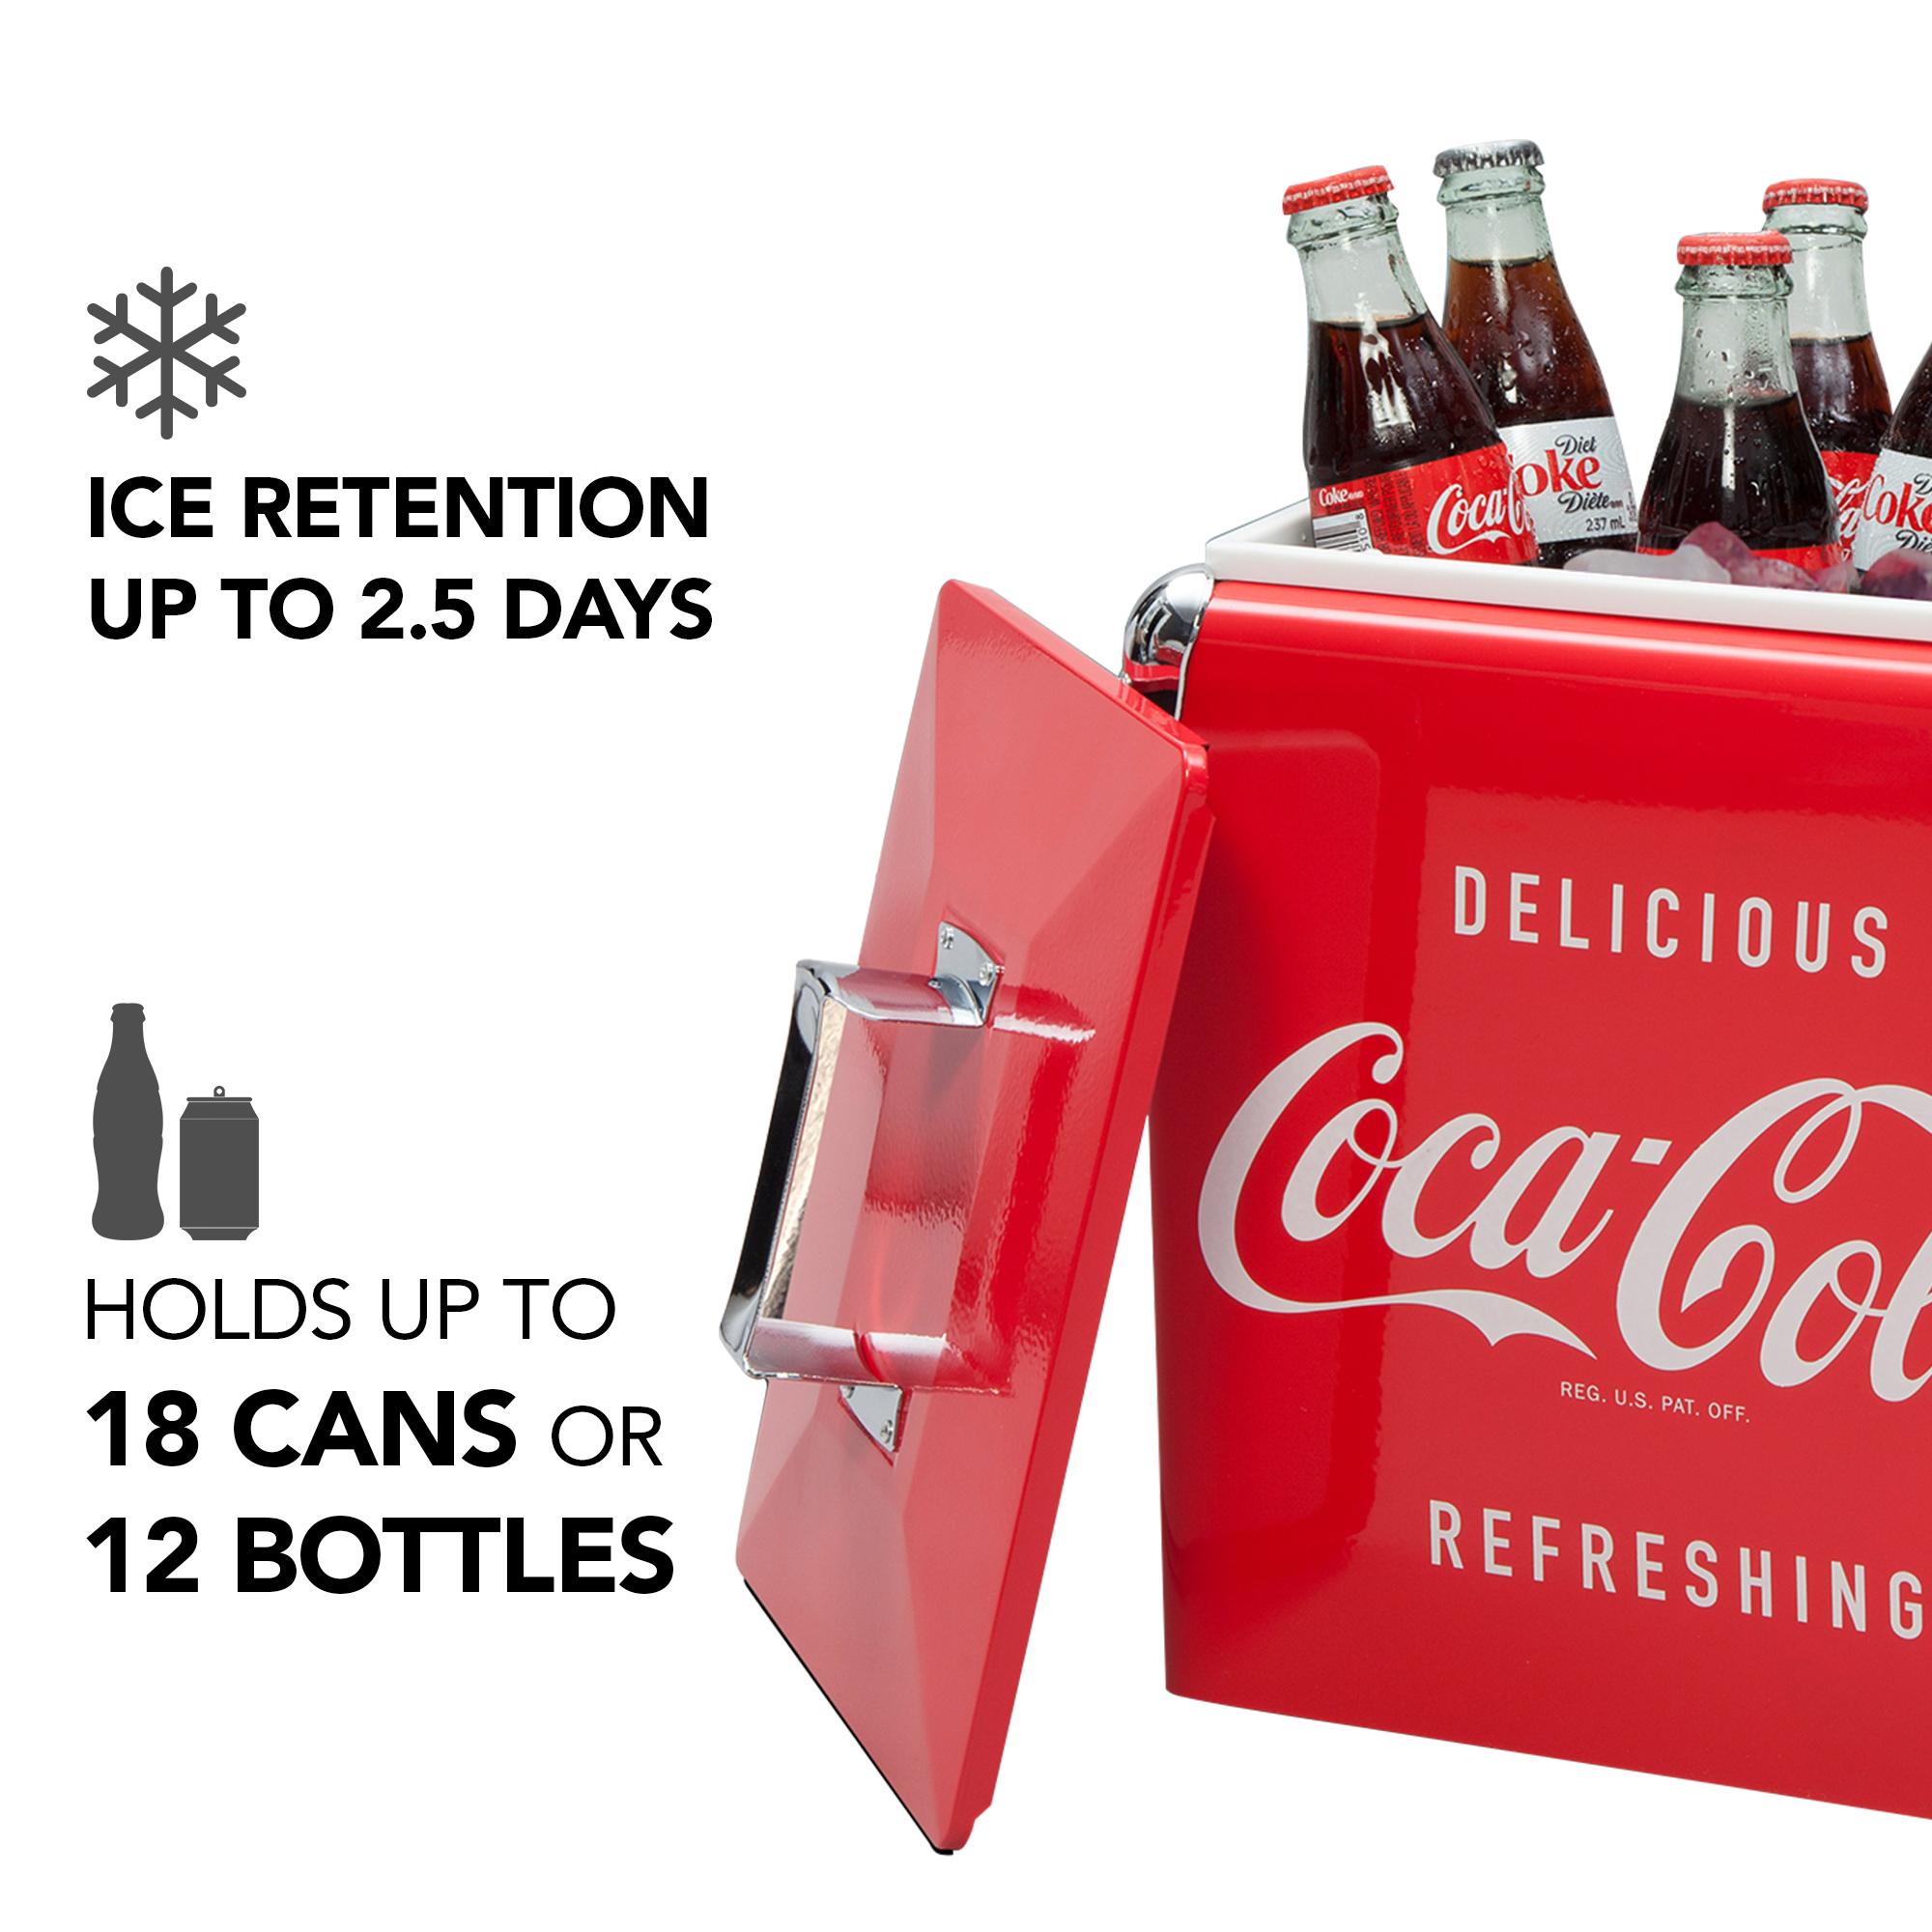 Coca-Cola Retro Portable Ice Chest Cooler with Bottle Opener 13L (14 qt), 18 Can Capacity, Red Vintage Style Ice Bucket for Camping, Beach, Picnic, RV, BBQs, Tailgating, Fishing - image 4 of 7